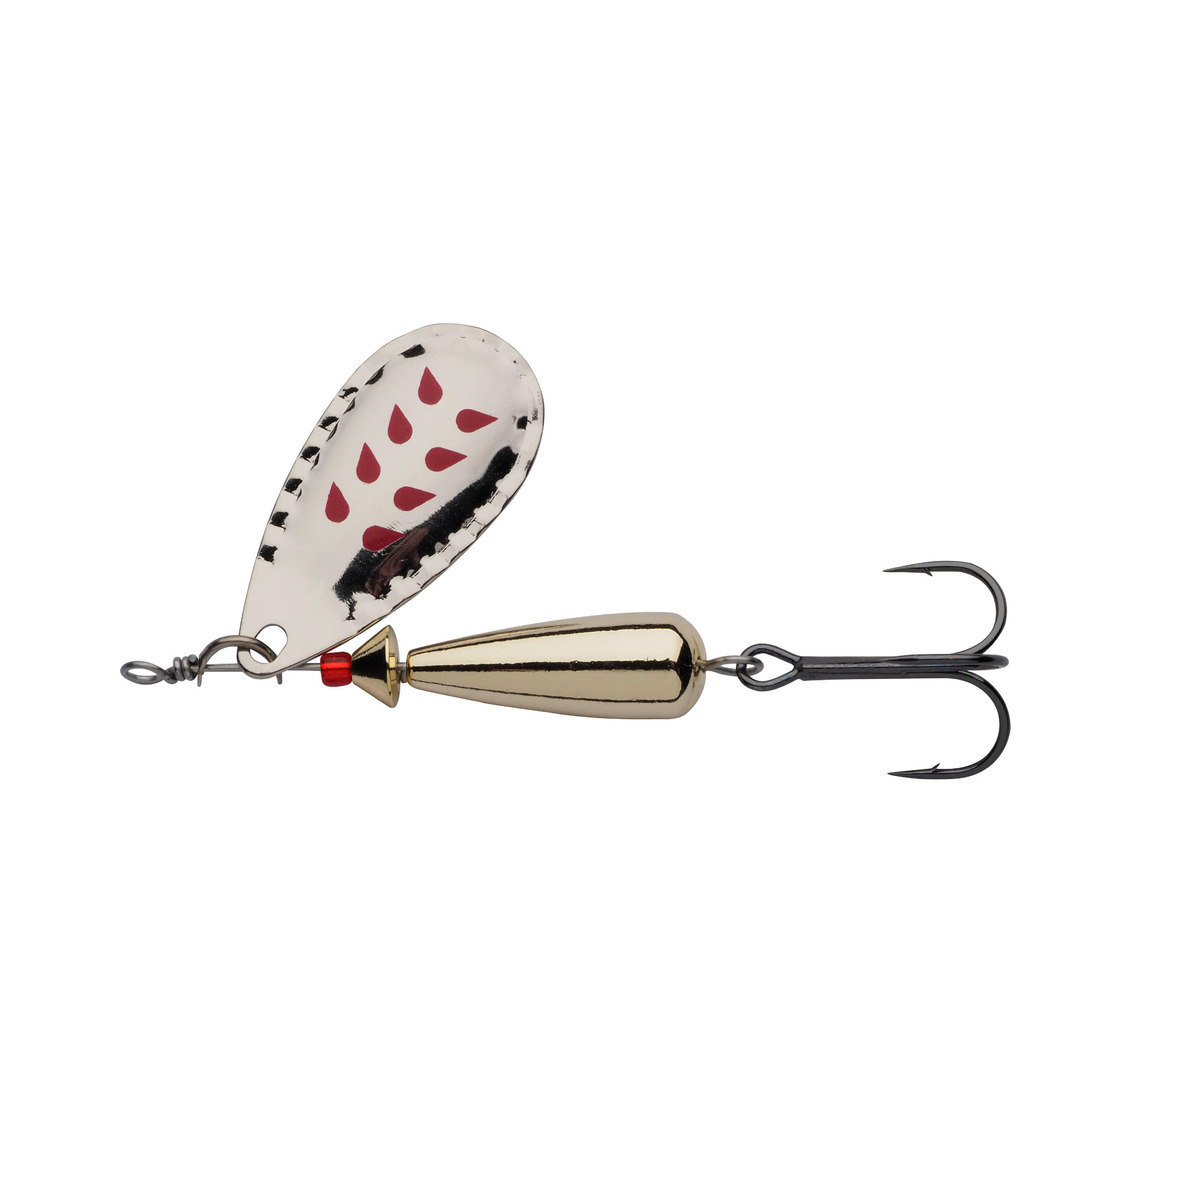 Abu Garcia Droppen Spinners 8 G - Silver-Red Marks - 46 mm